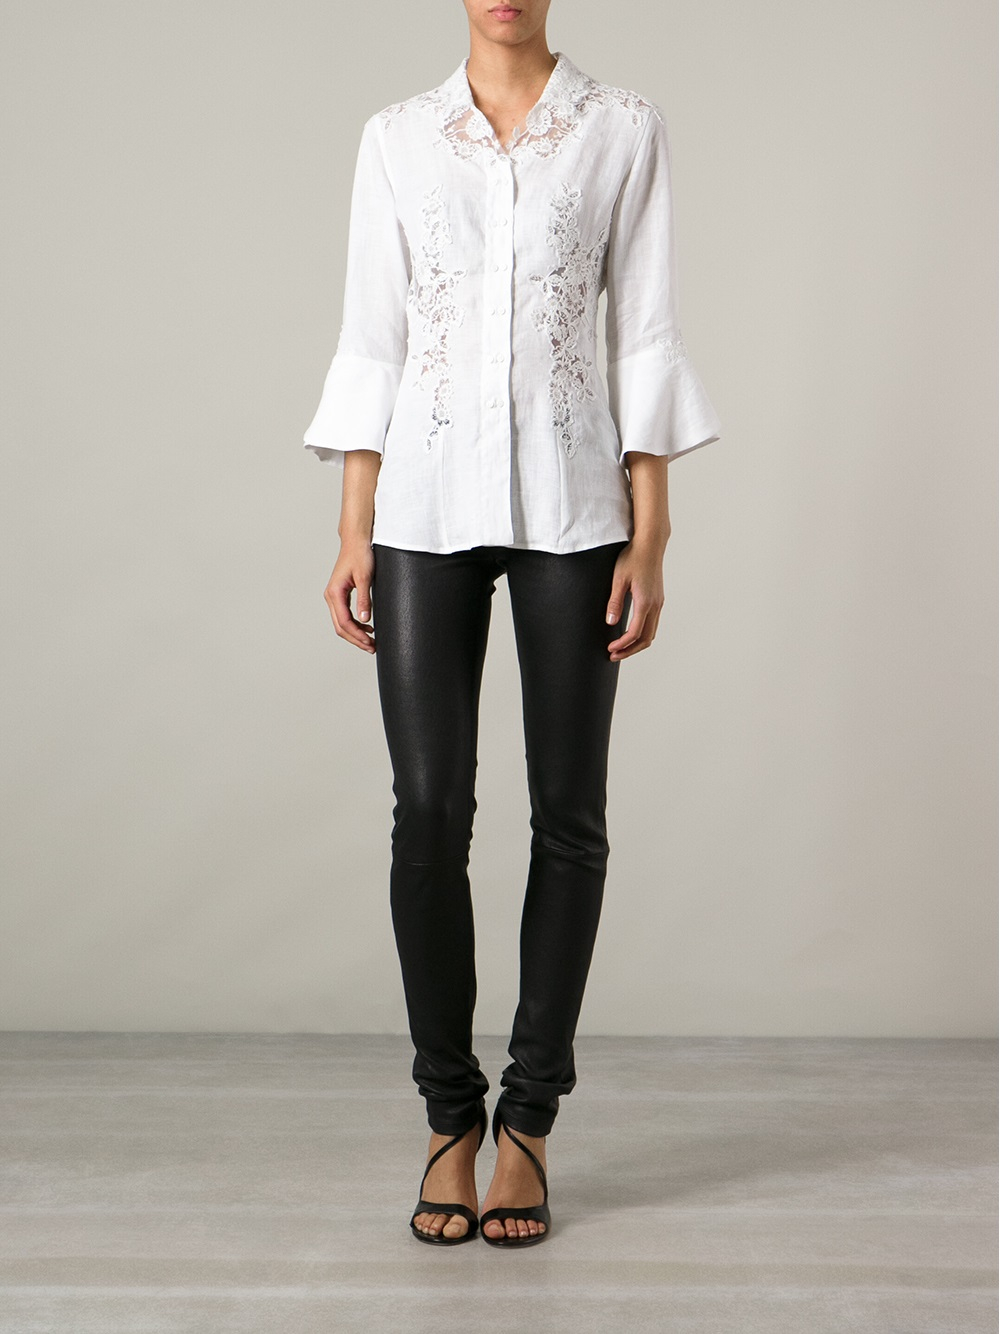 Ermanno Scervino Lace Panel Shirt in White | Lyst